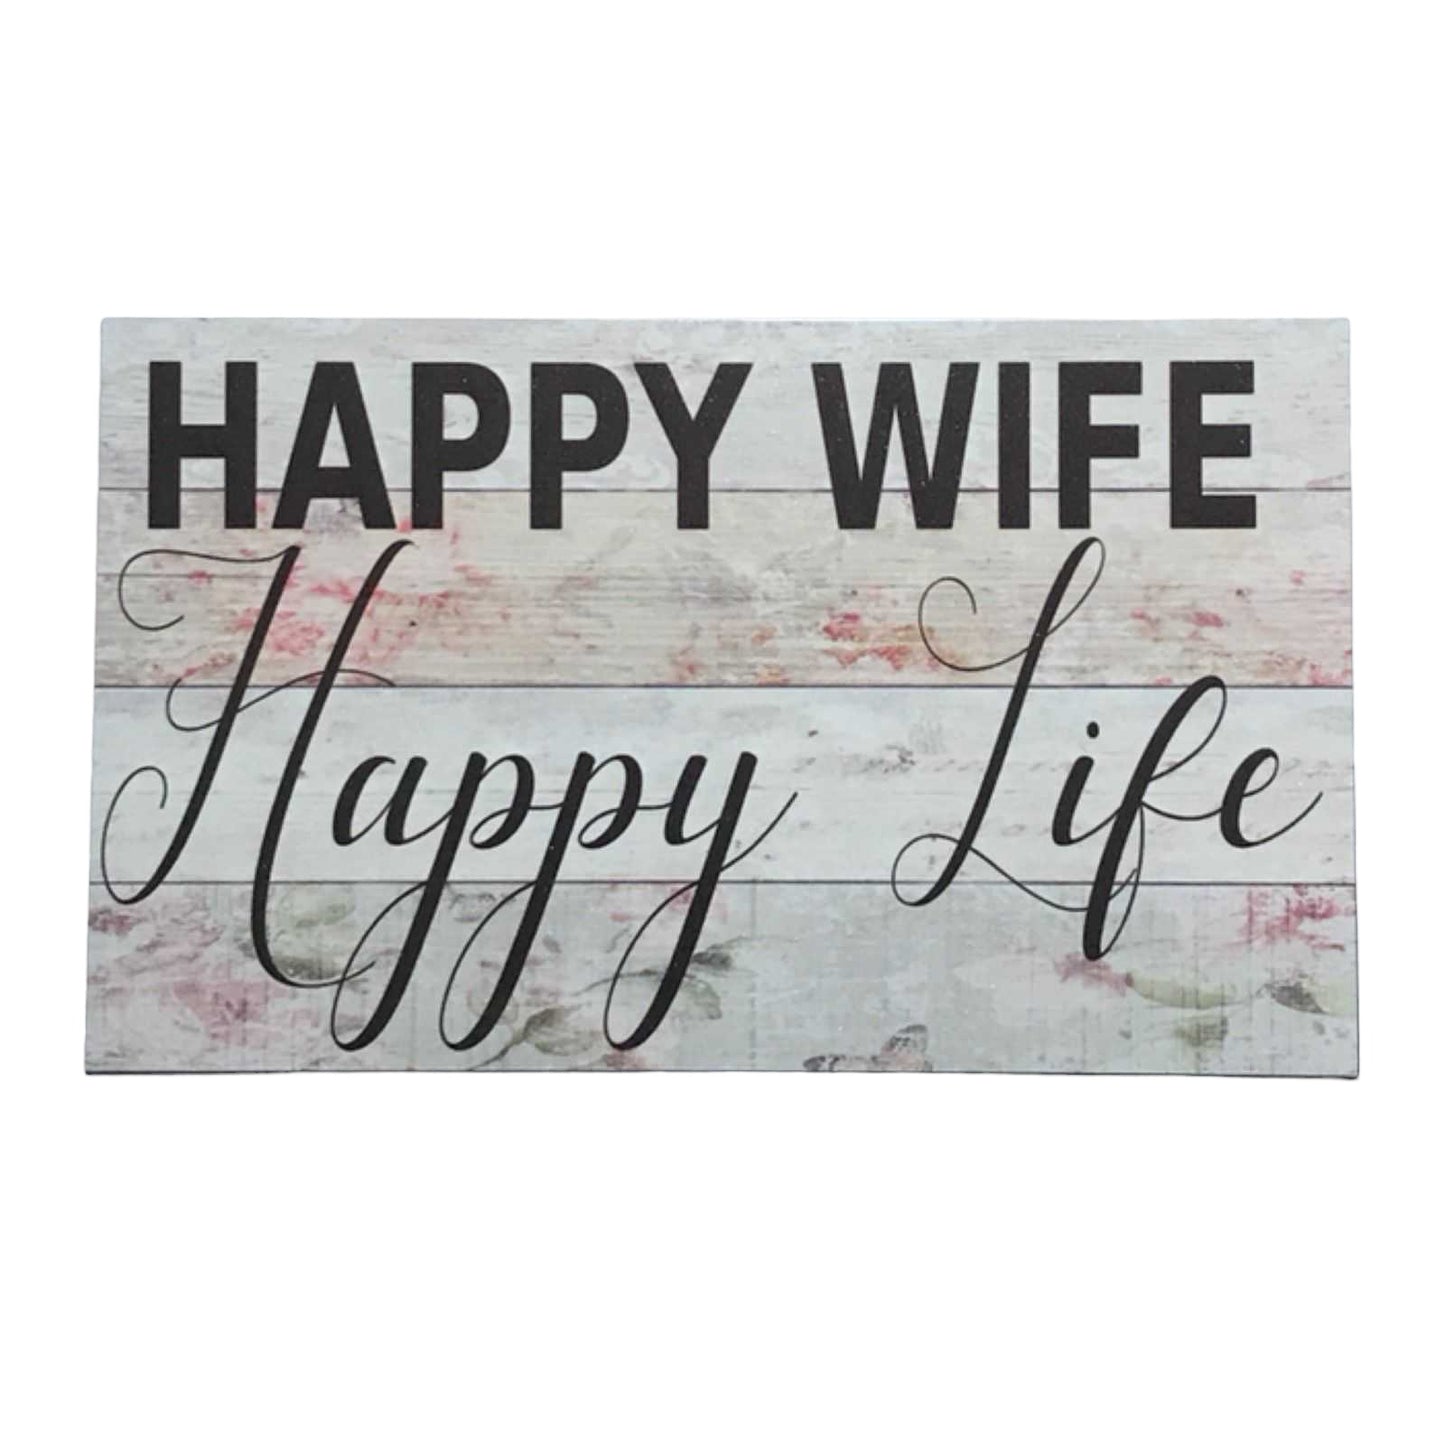 Happy Wife Life Sign - The Renmy Store Homewares & Gifts 